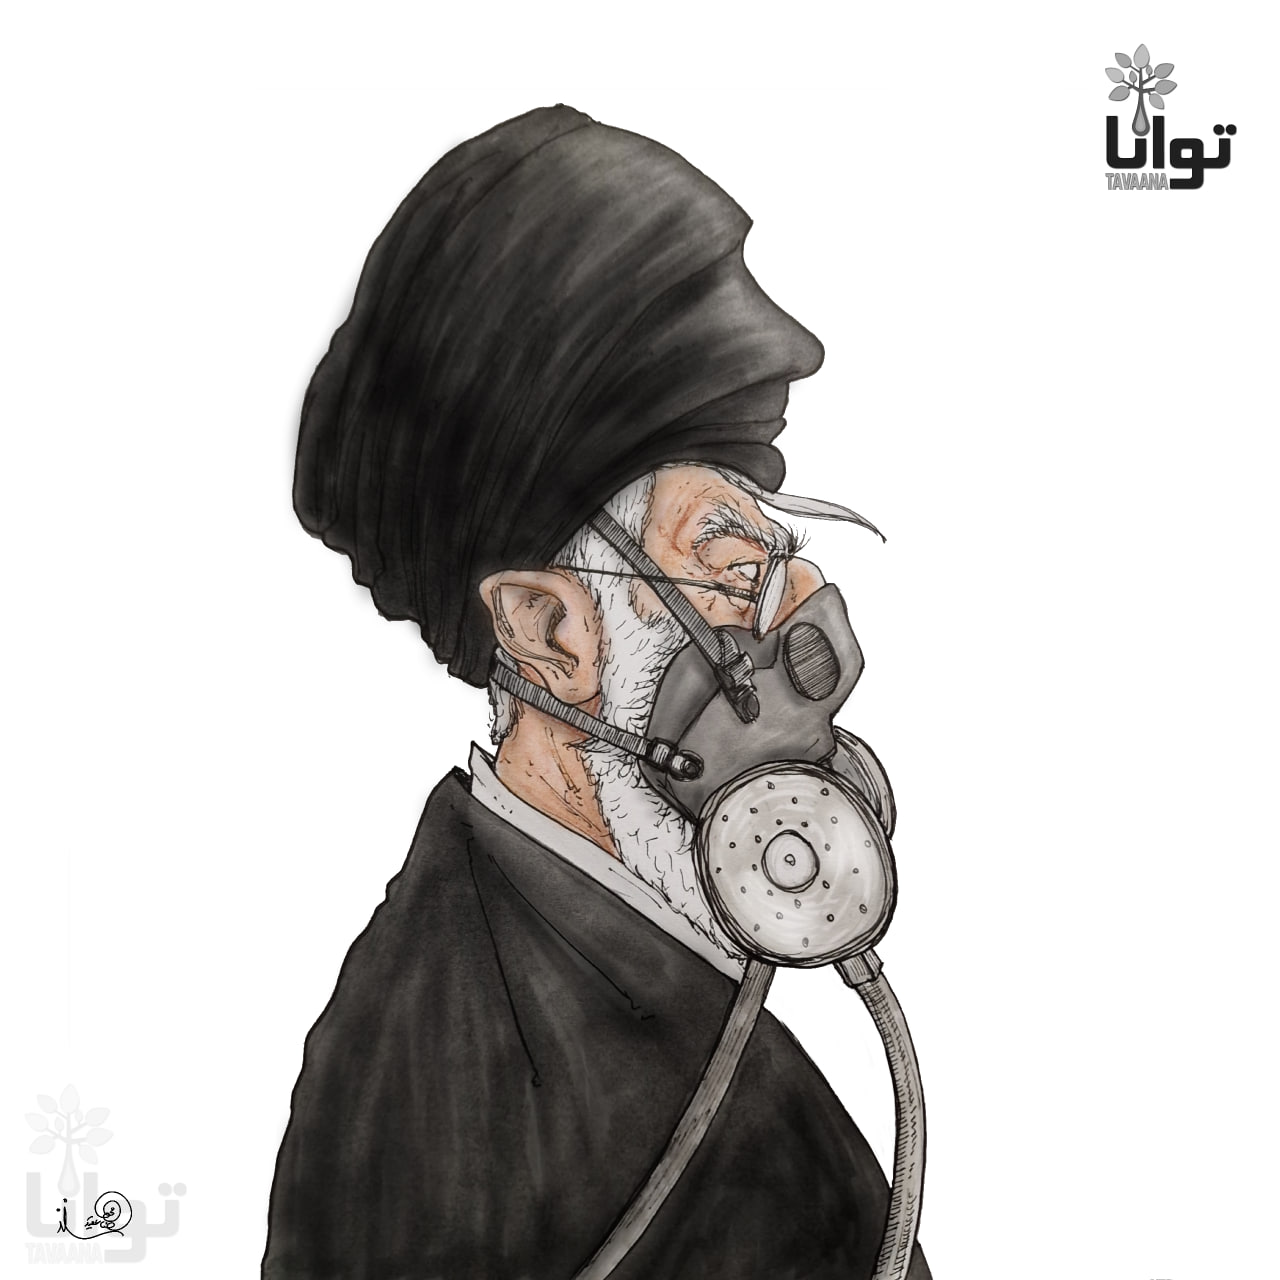 Khamenei and chemical attack on students